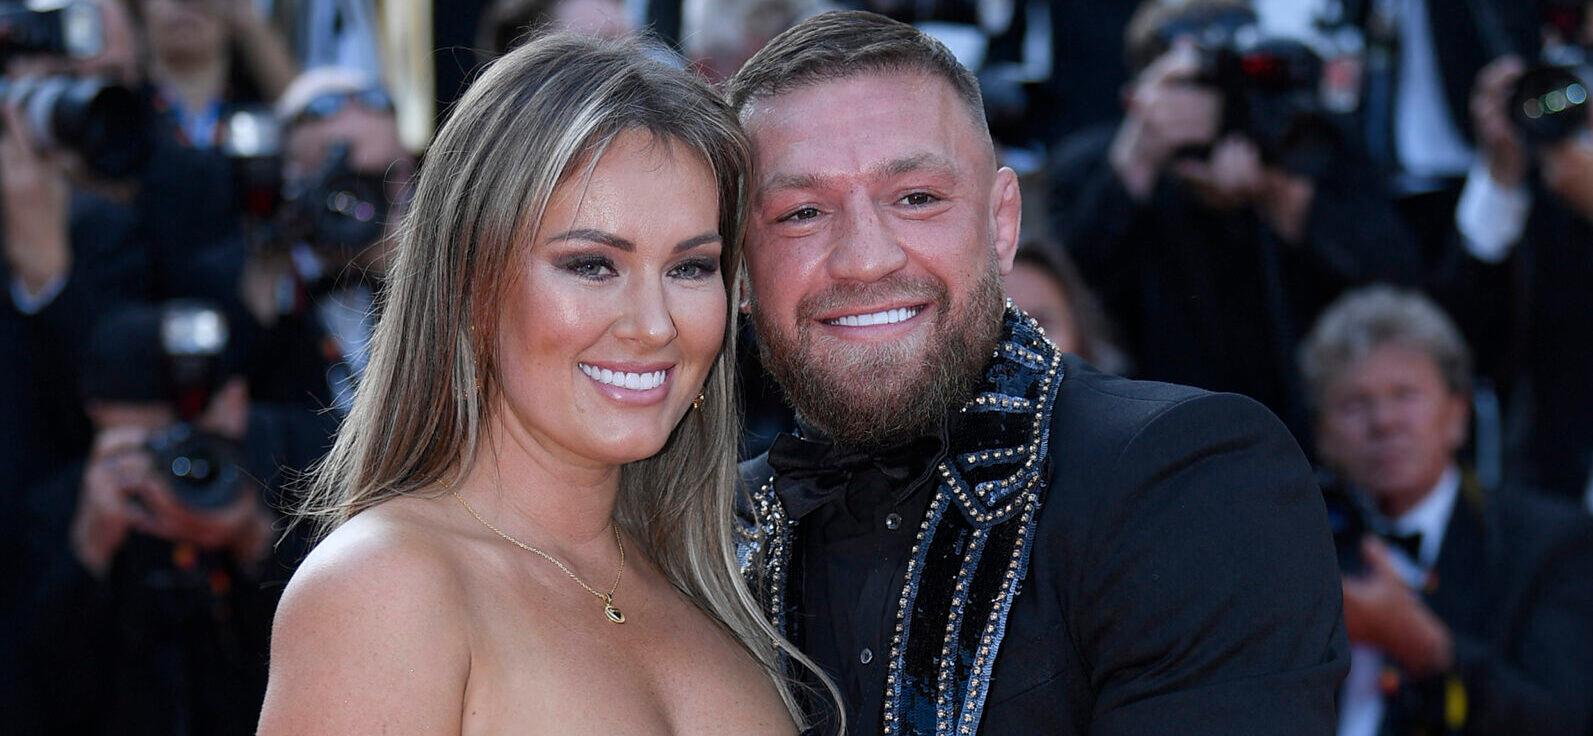 Inside Conor McGregor’s Chanel Filled Birthday Surprise For Pregnant Fiancée